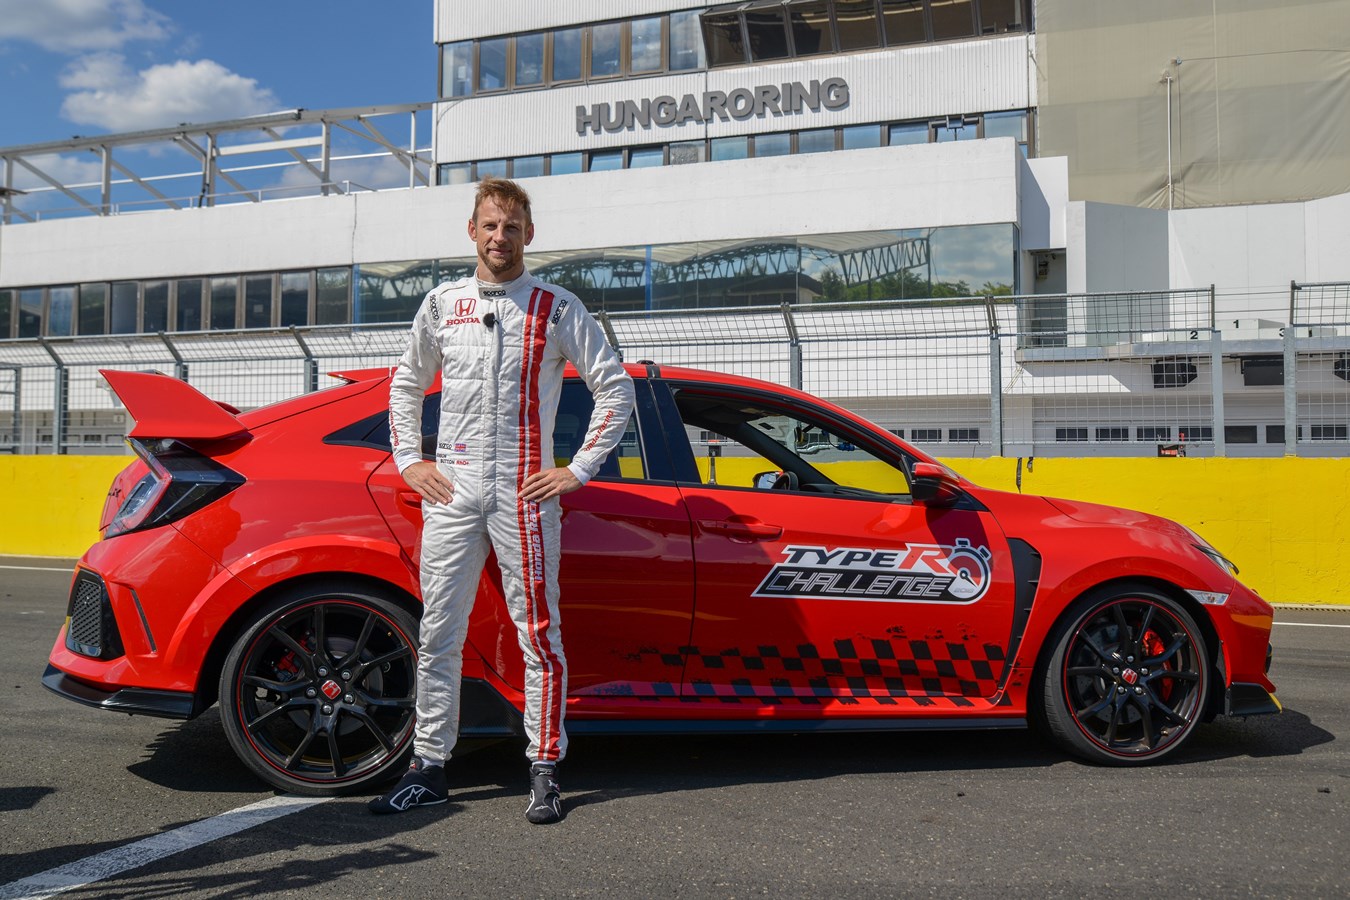 Mission accomplished! Jenson Button secures Honda's fifth and final planned lap record in Civic Type R Challenge 2018